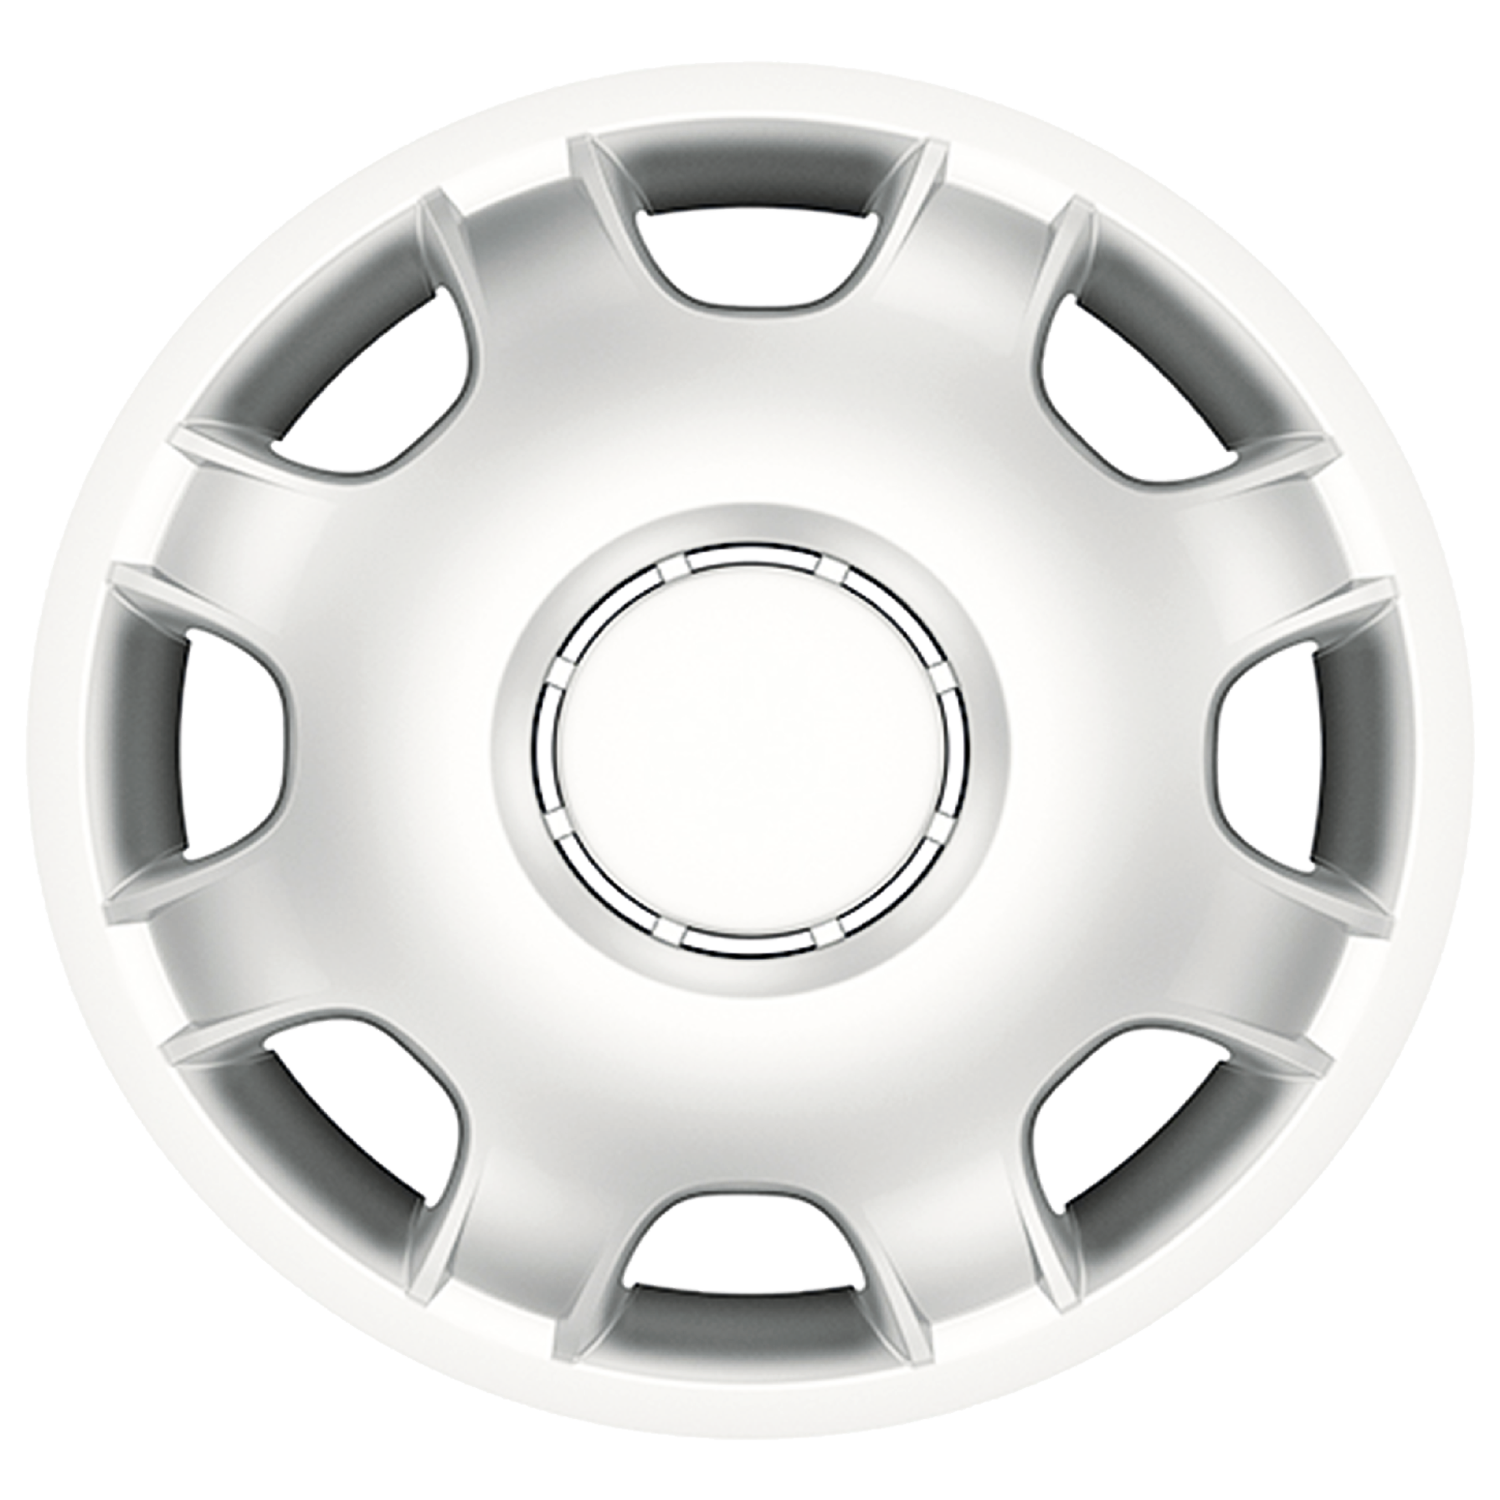 Simply Auto 16 inch Brawn Commercial Wheel Trims Image 2